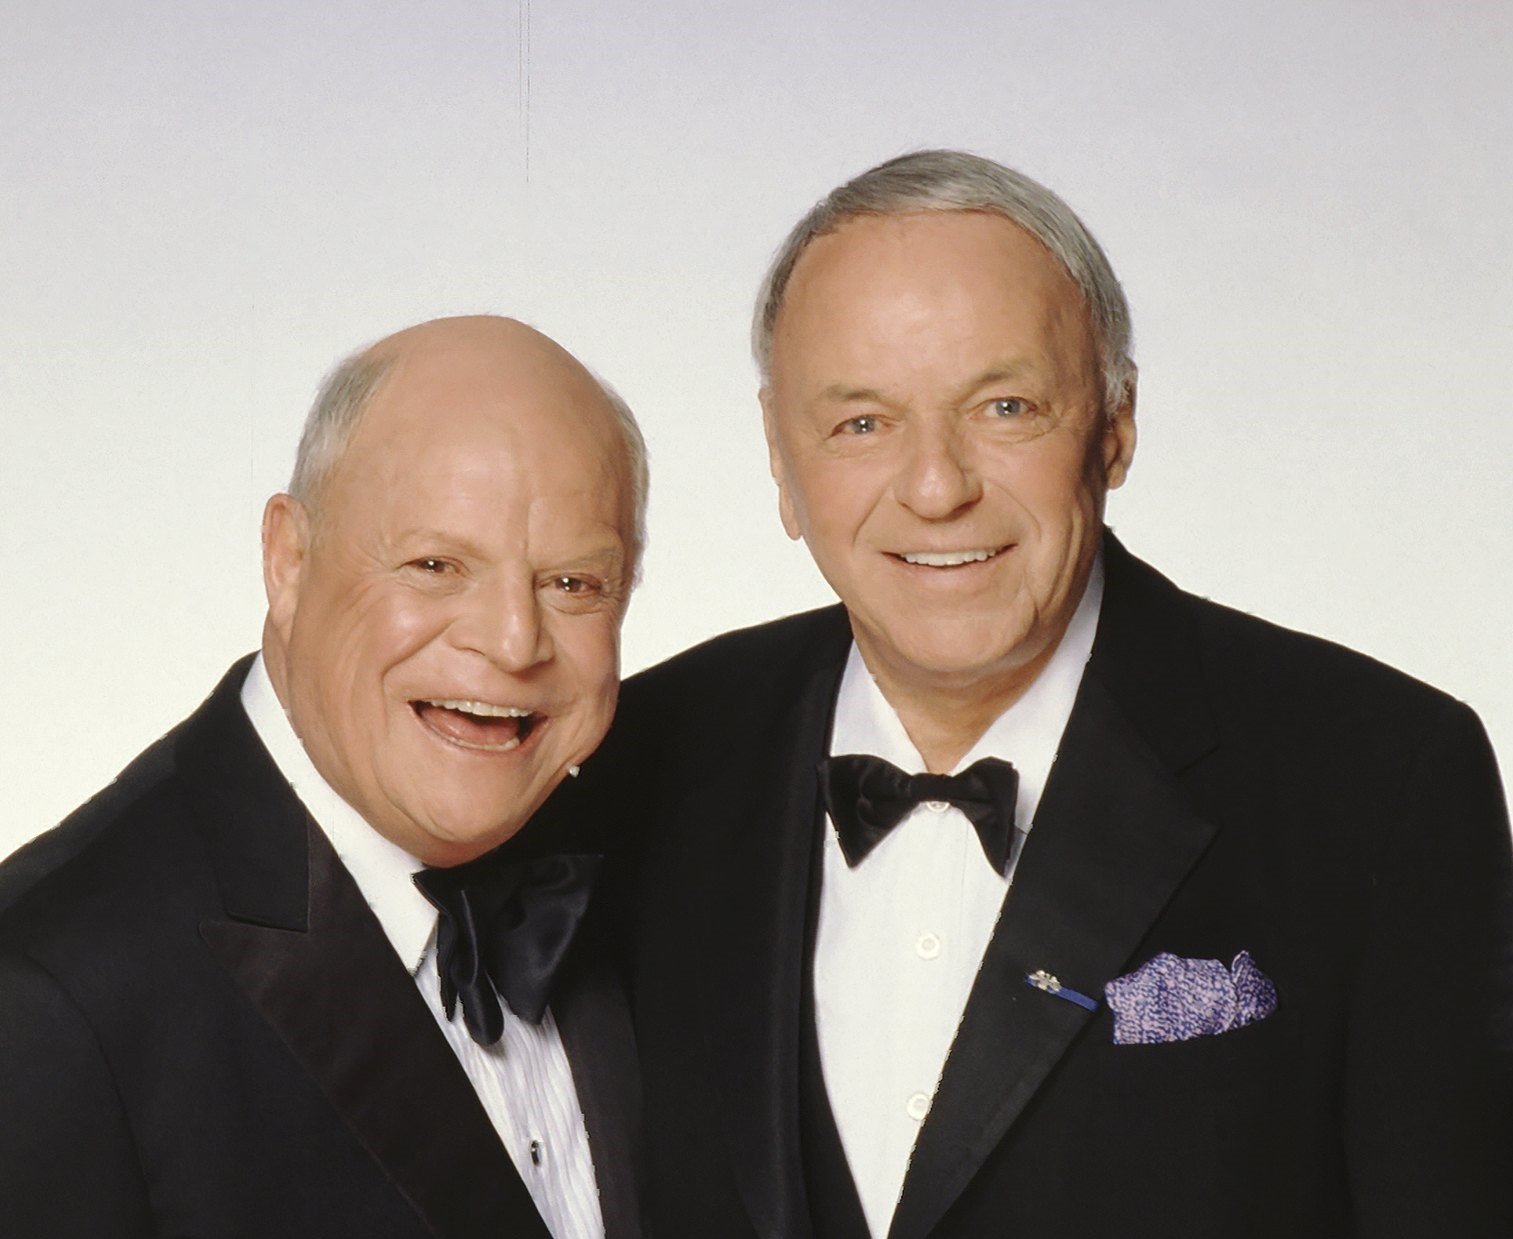 Don Rickles and Frank Sinatra wear tuxedos and stand in front of a white background.